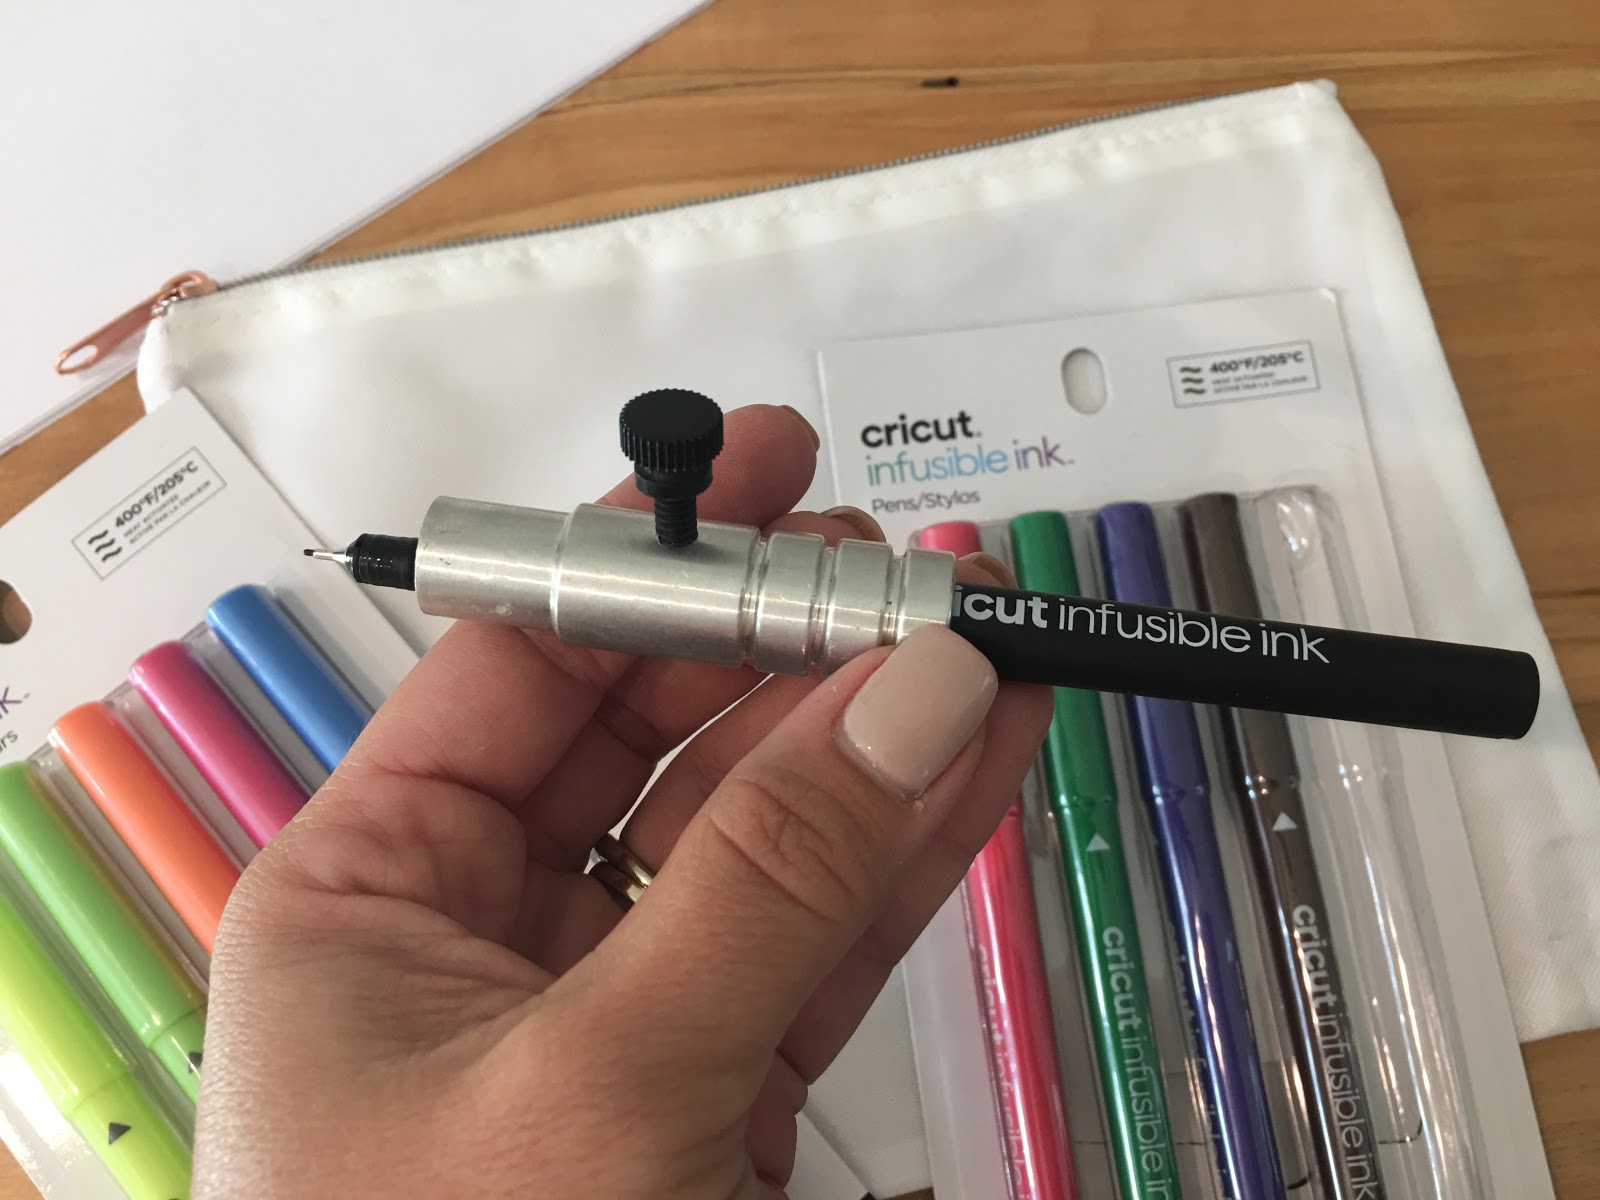 Sublimation for Beginners with Infusible Ink Markers